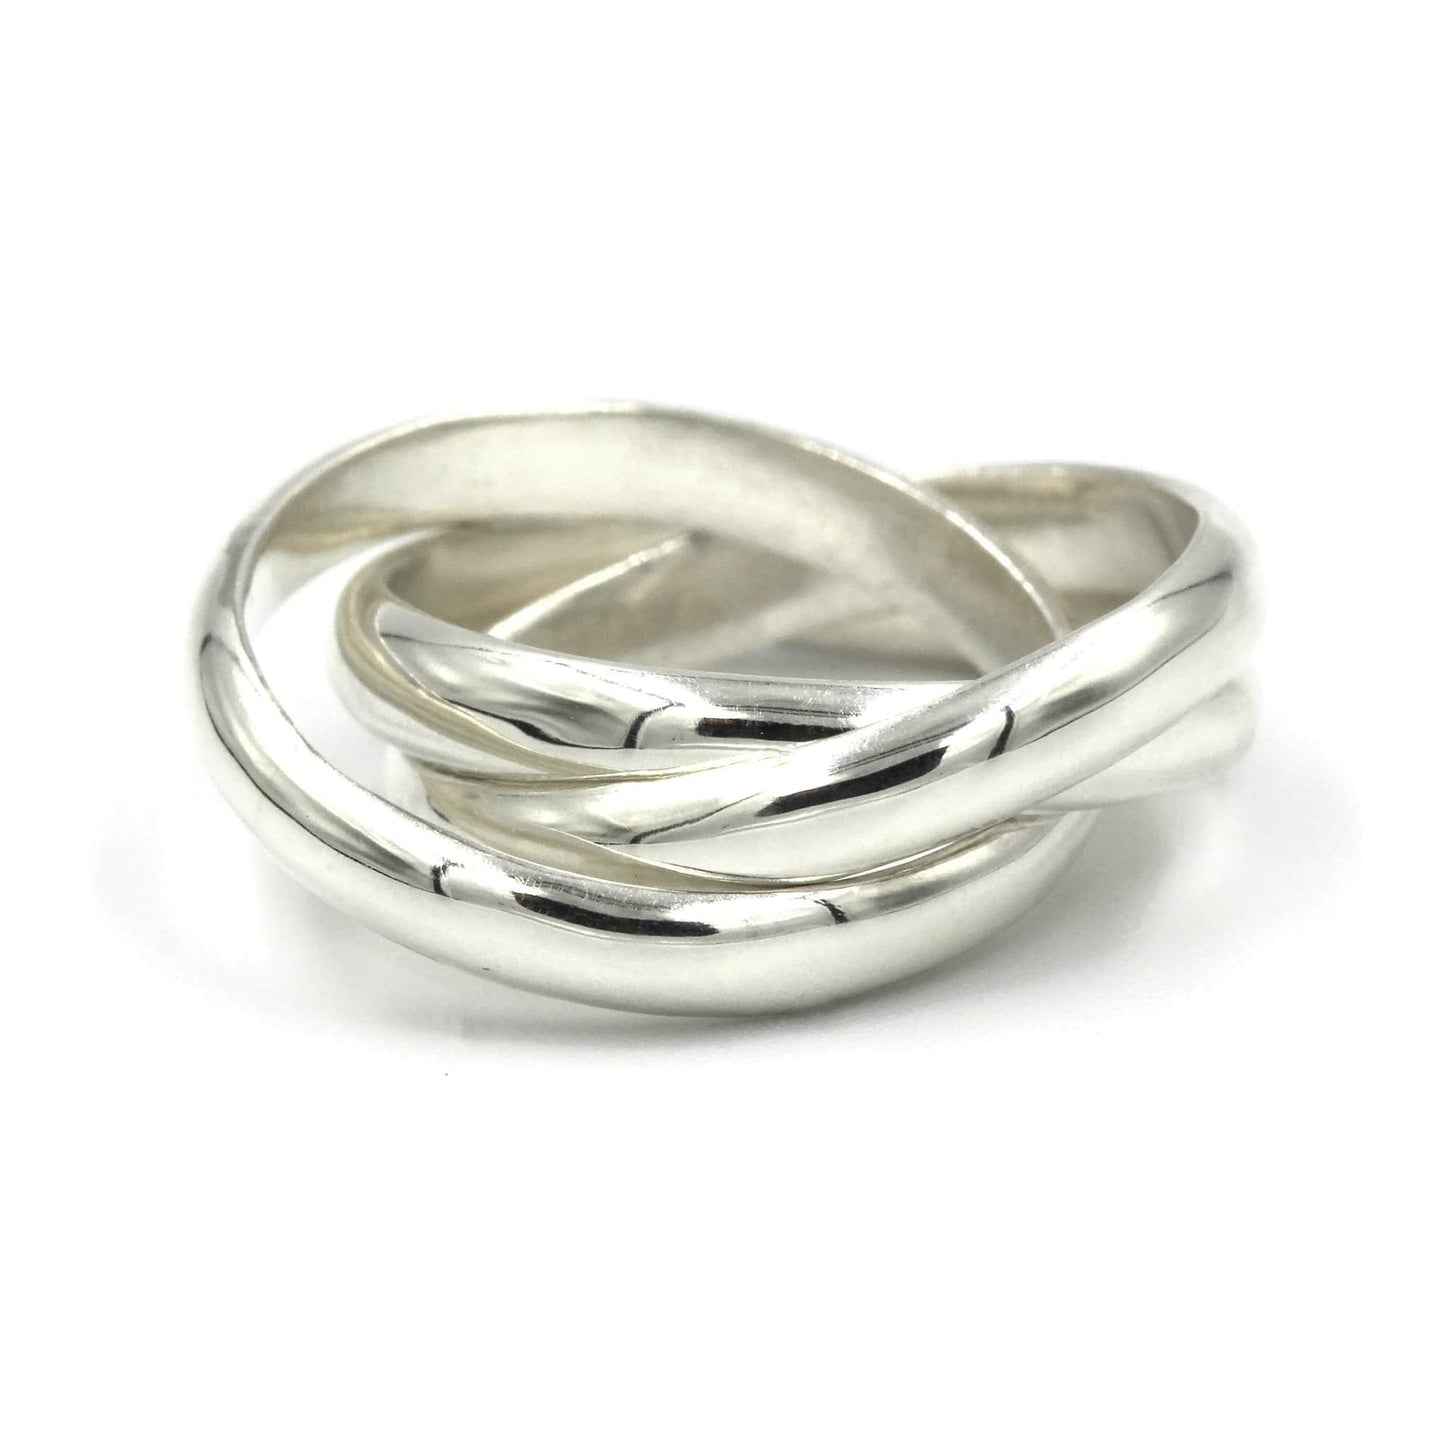 A sterling silver Russian wedding ring with three bands